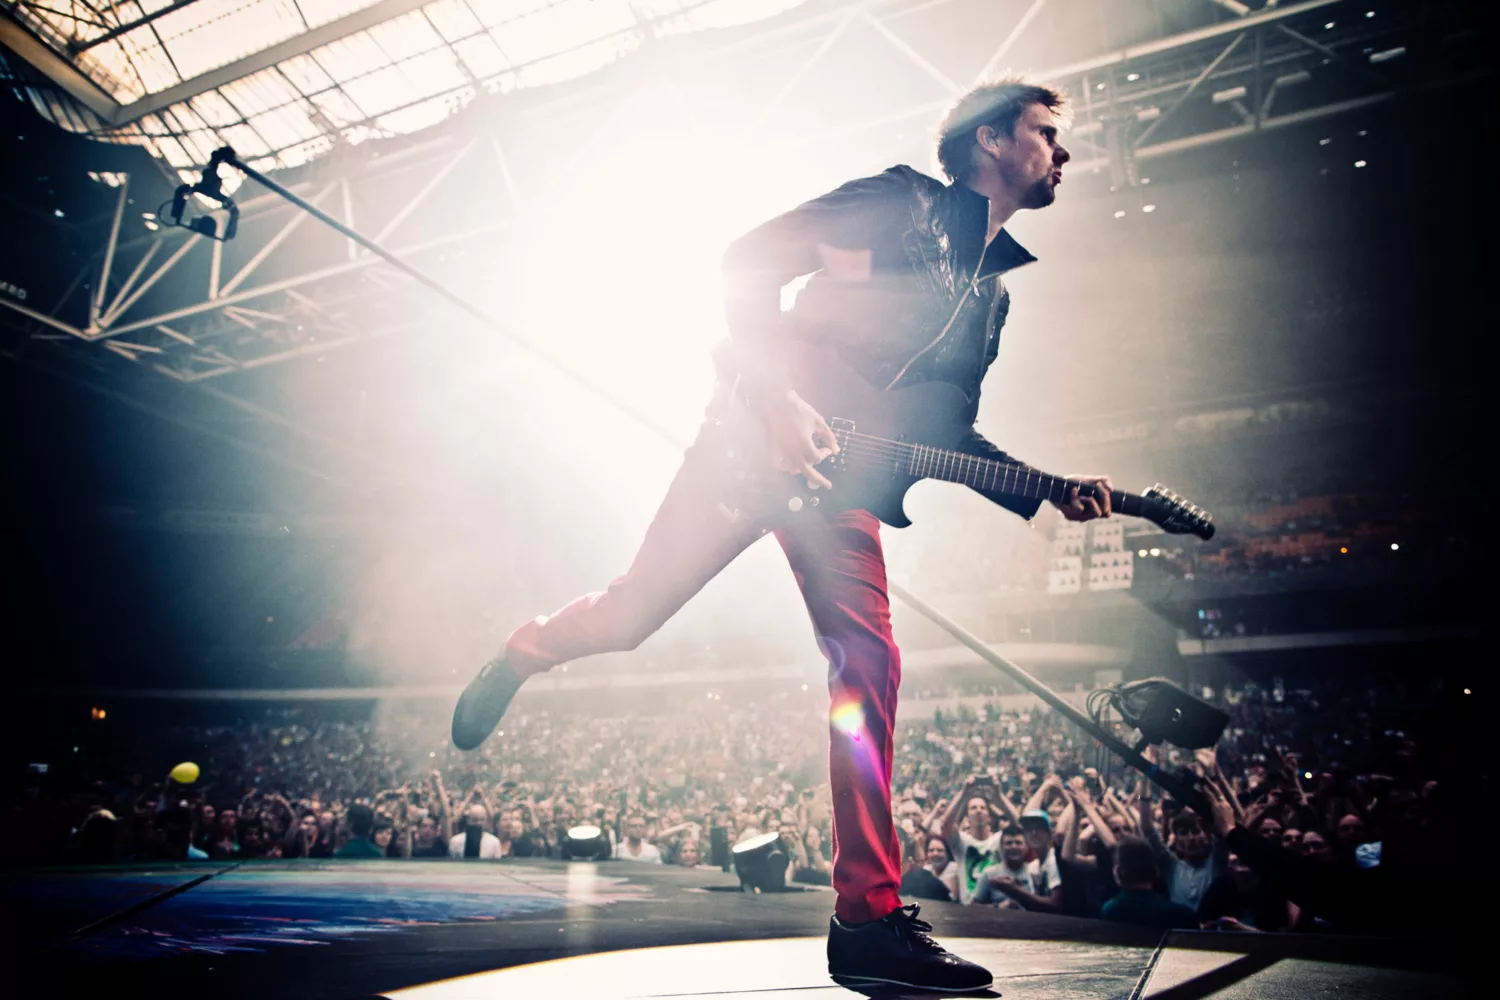 Just how soon could Muse’s new material drop?